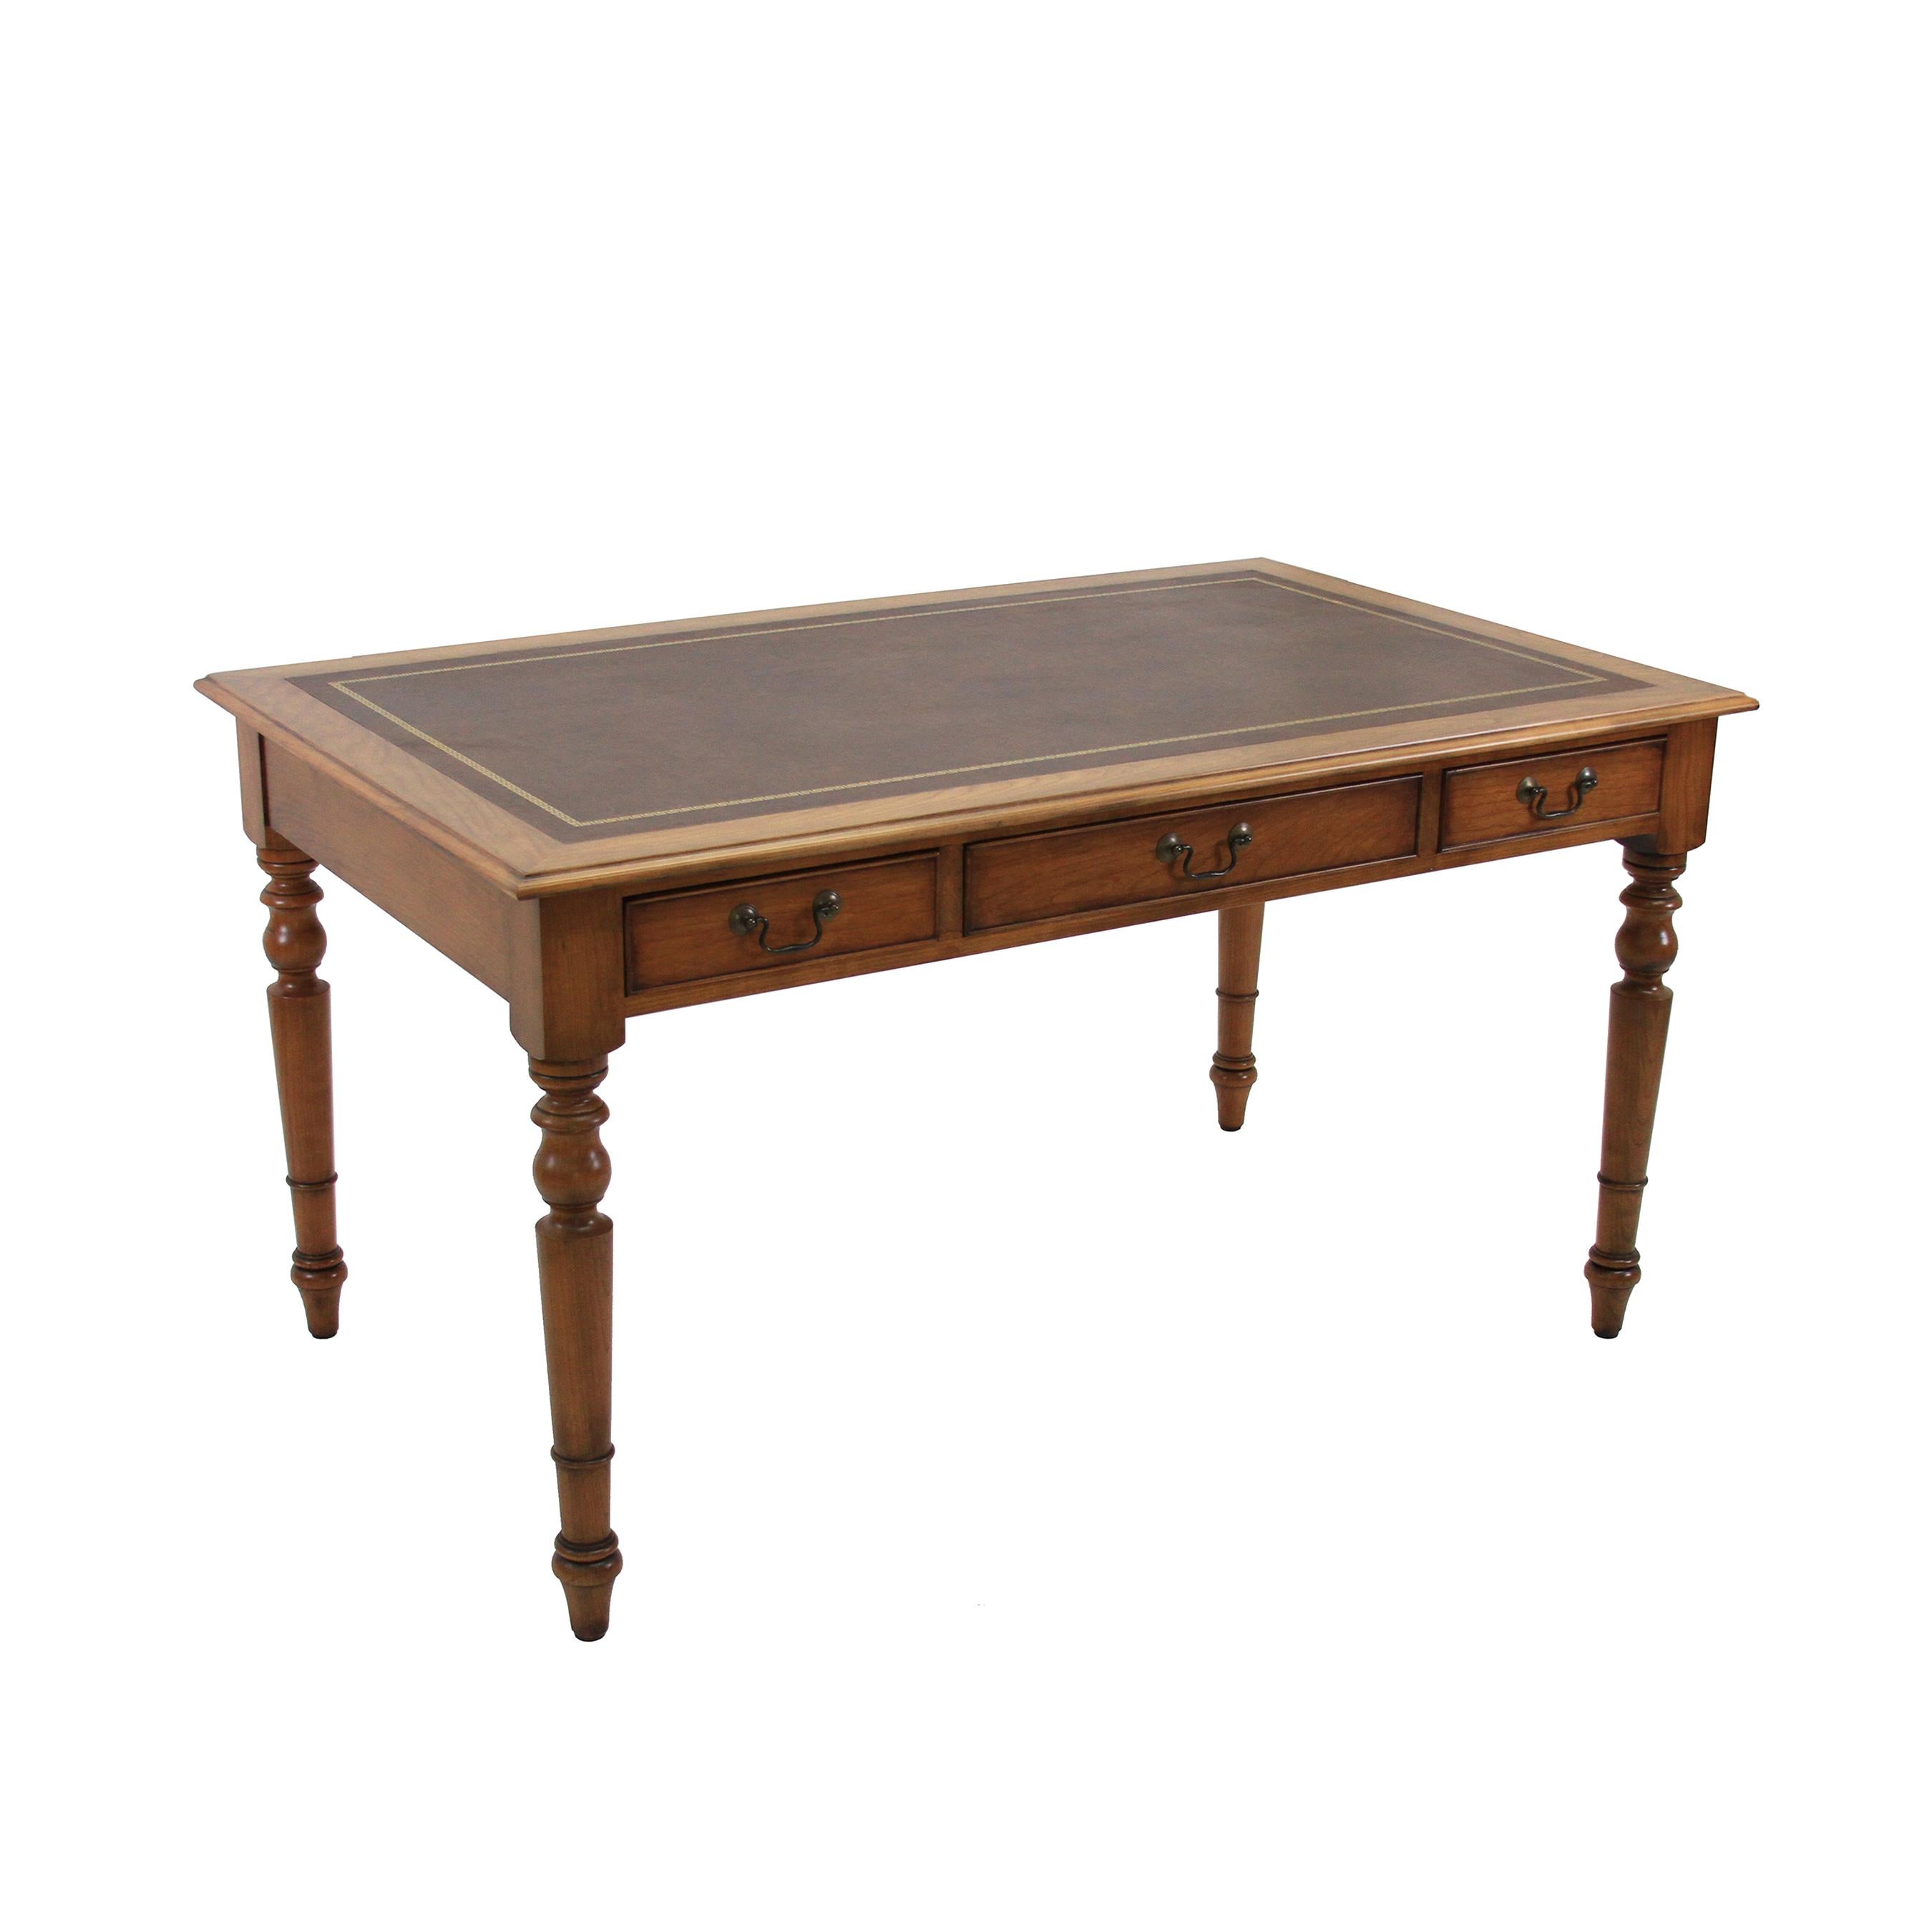 The solid cherry Litchfield writing desk has a gold embossed inlaid leather top with country farmhouse style legs and 3 cock beaded drawers with antique brass bail pulls. The leather can be customized as well as the leg style, hardware and size for